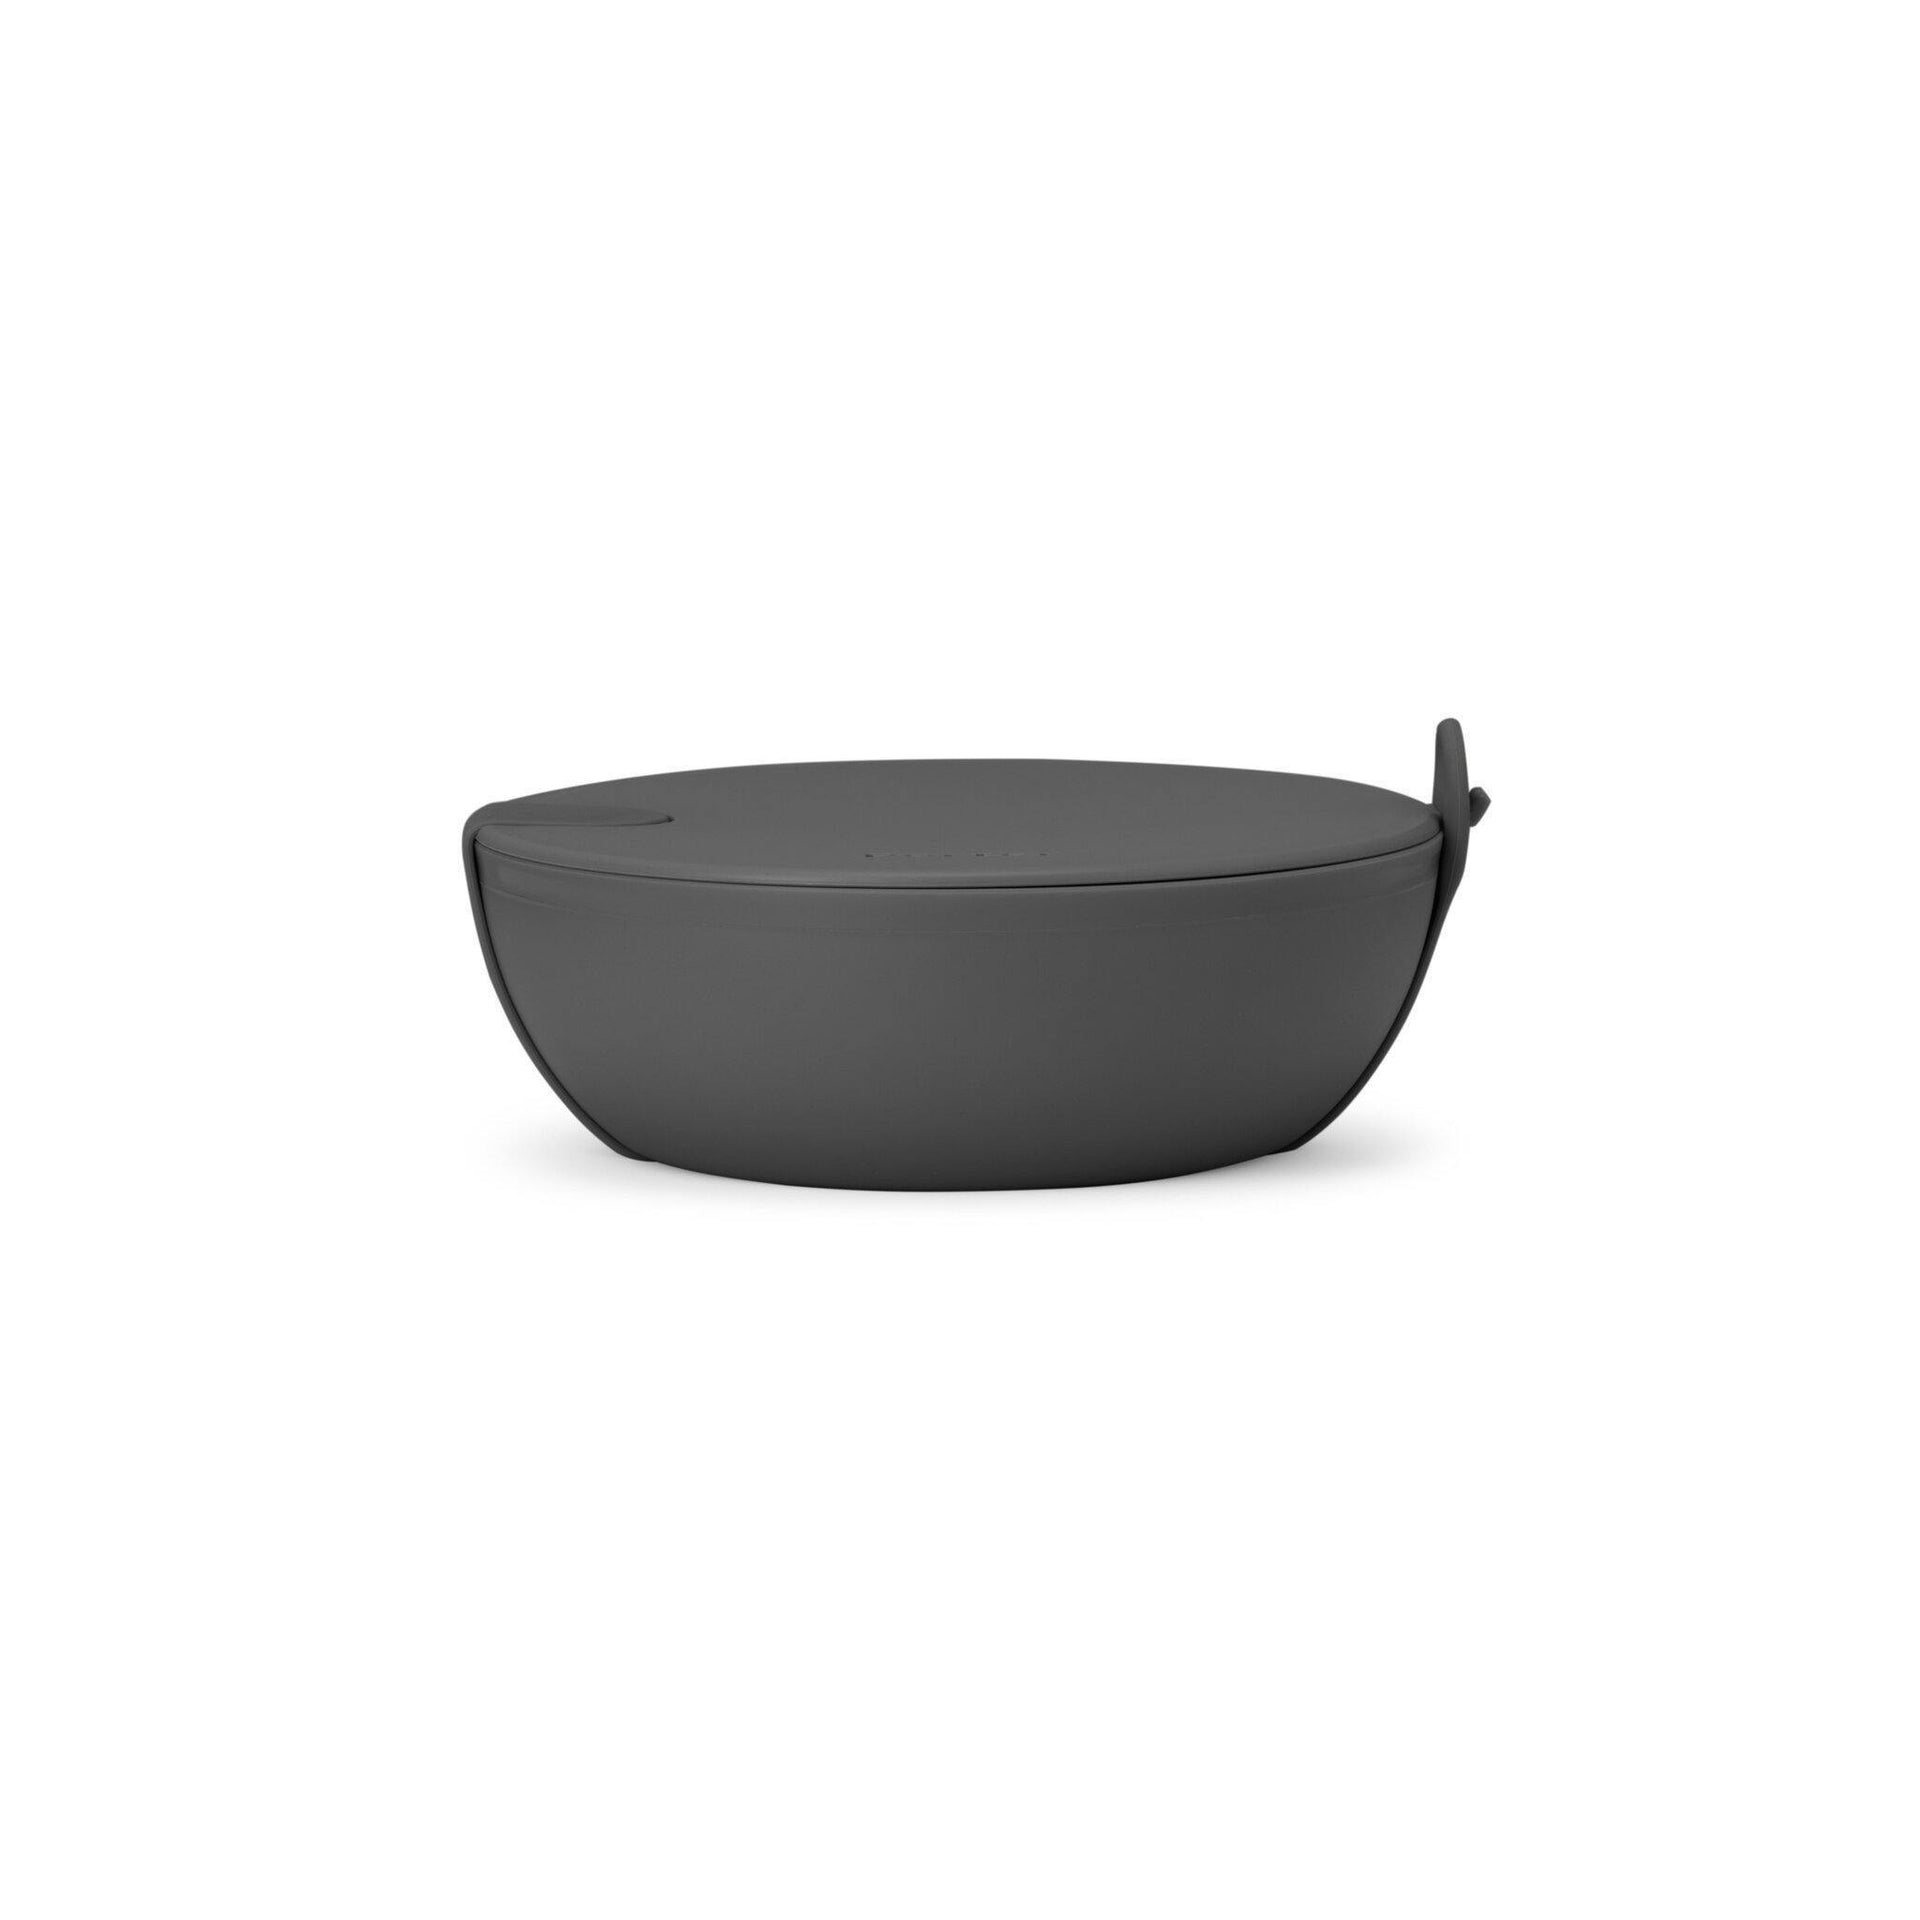 W & P design: Lunch Bowl Plastic - Charcoal - Upcycle Studio